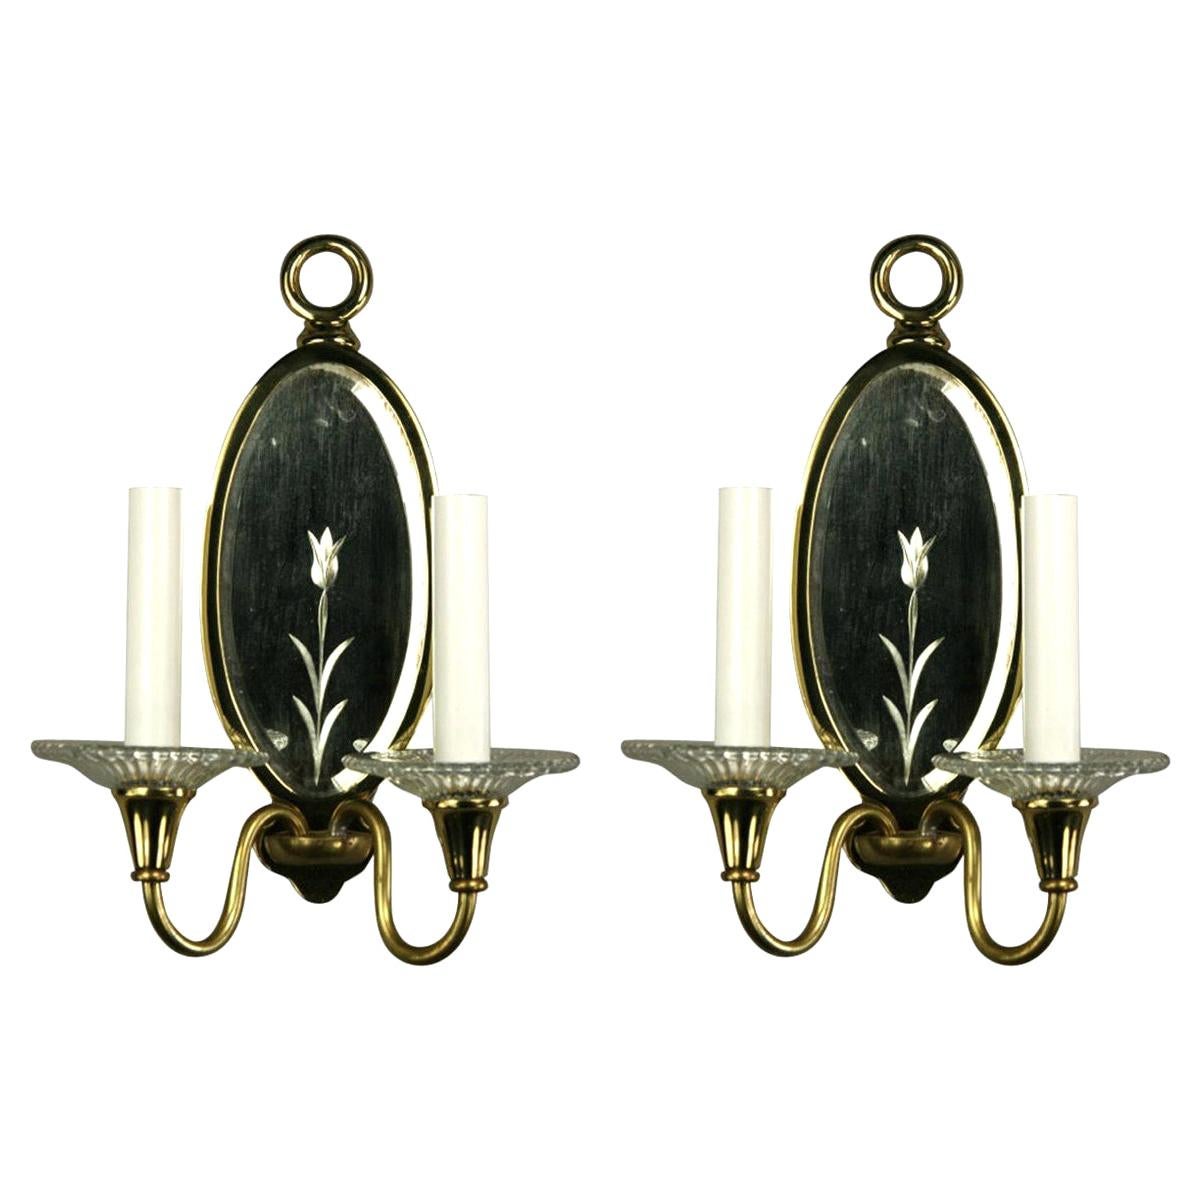 Pair of Double Arm Mirrored Sconce